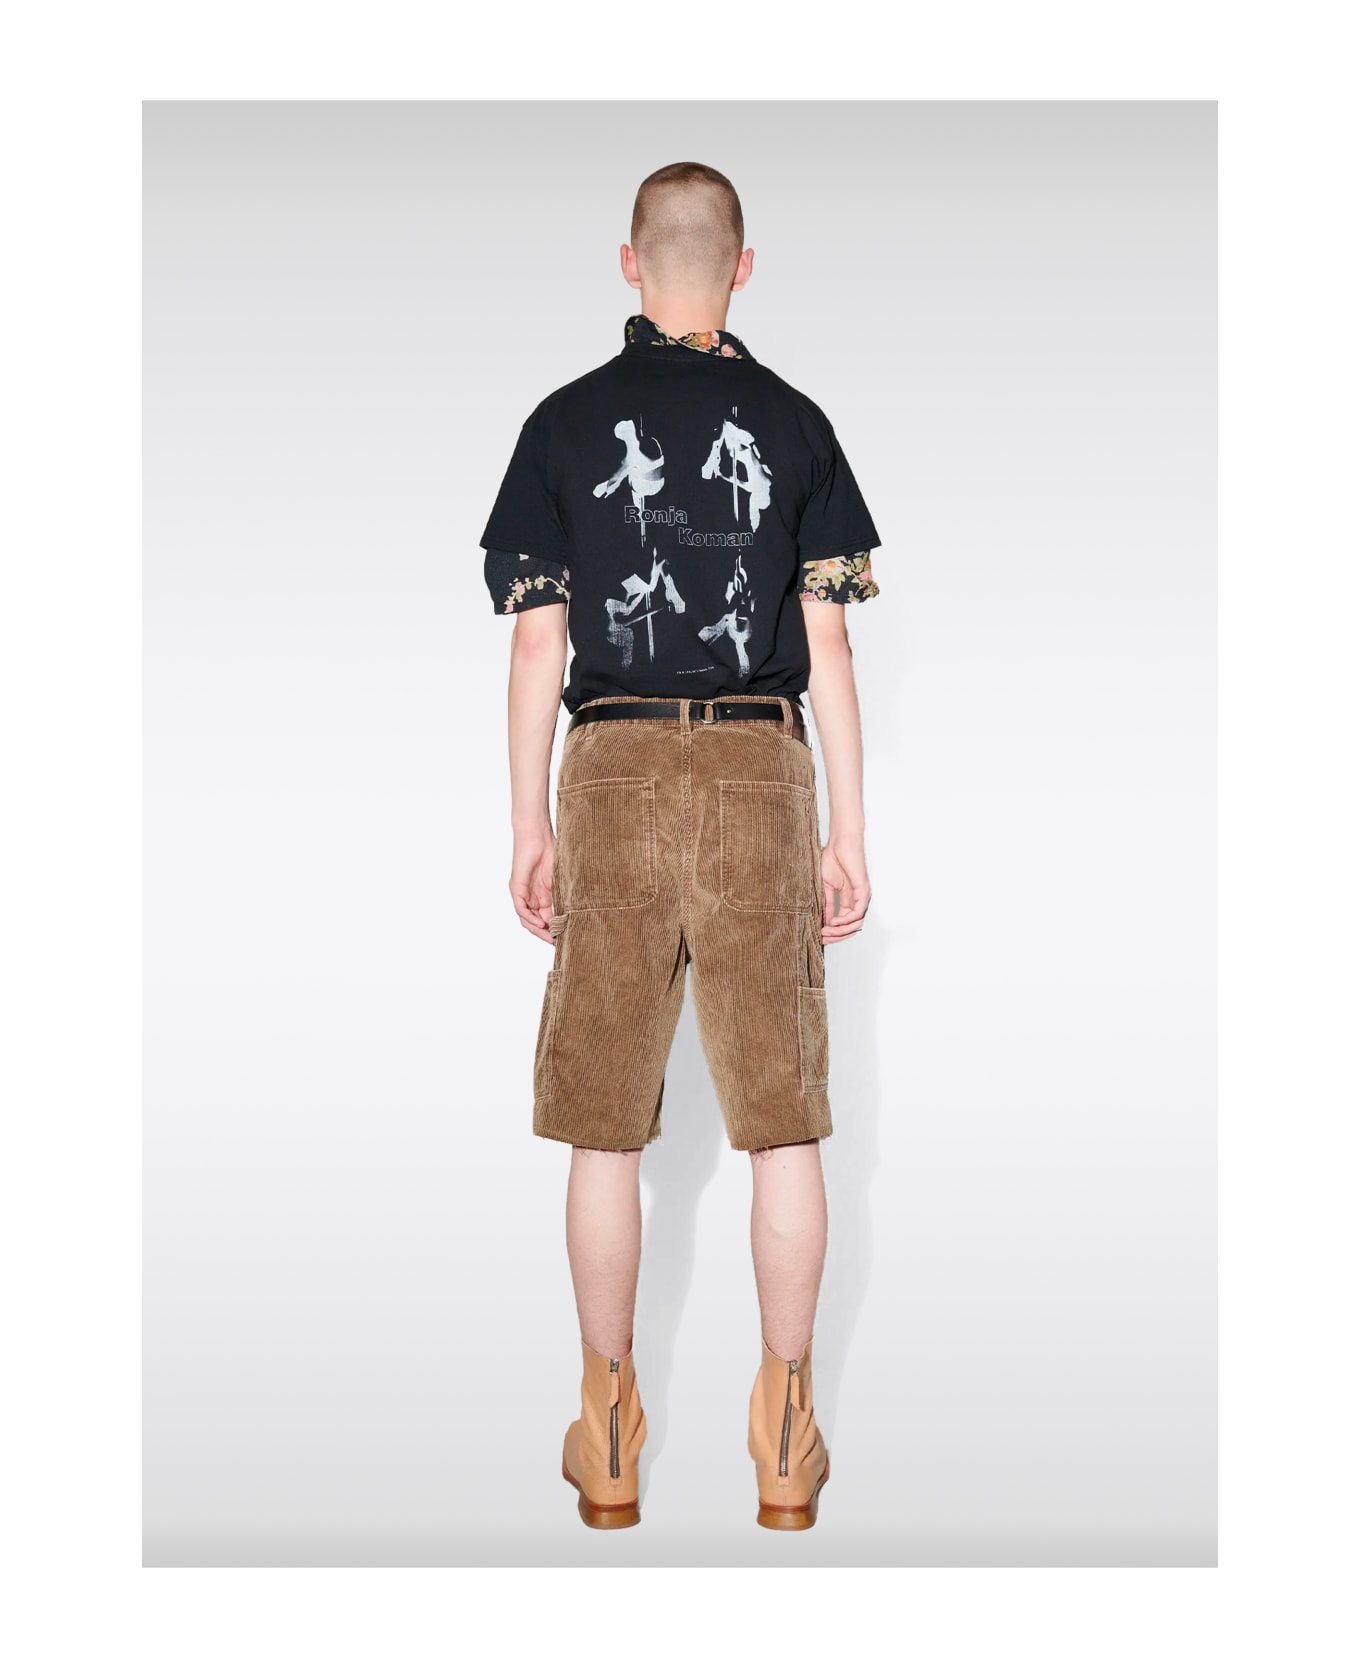 Our Legacy Joiner Short Light brown corduroy work shorts with spray paint - Joiner Short - Tortora